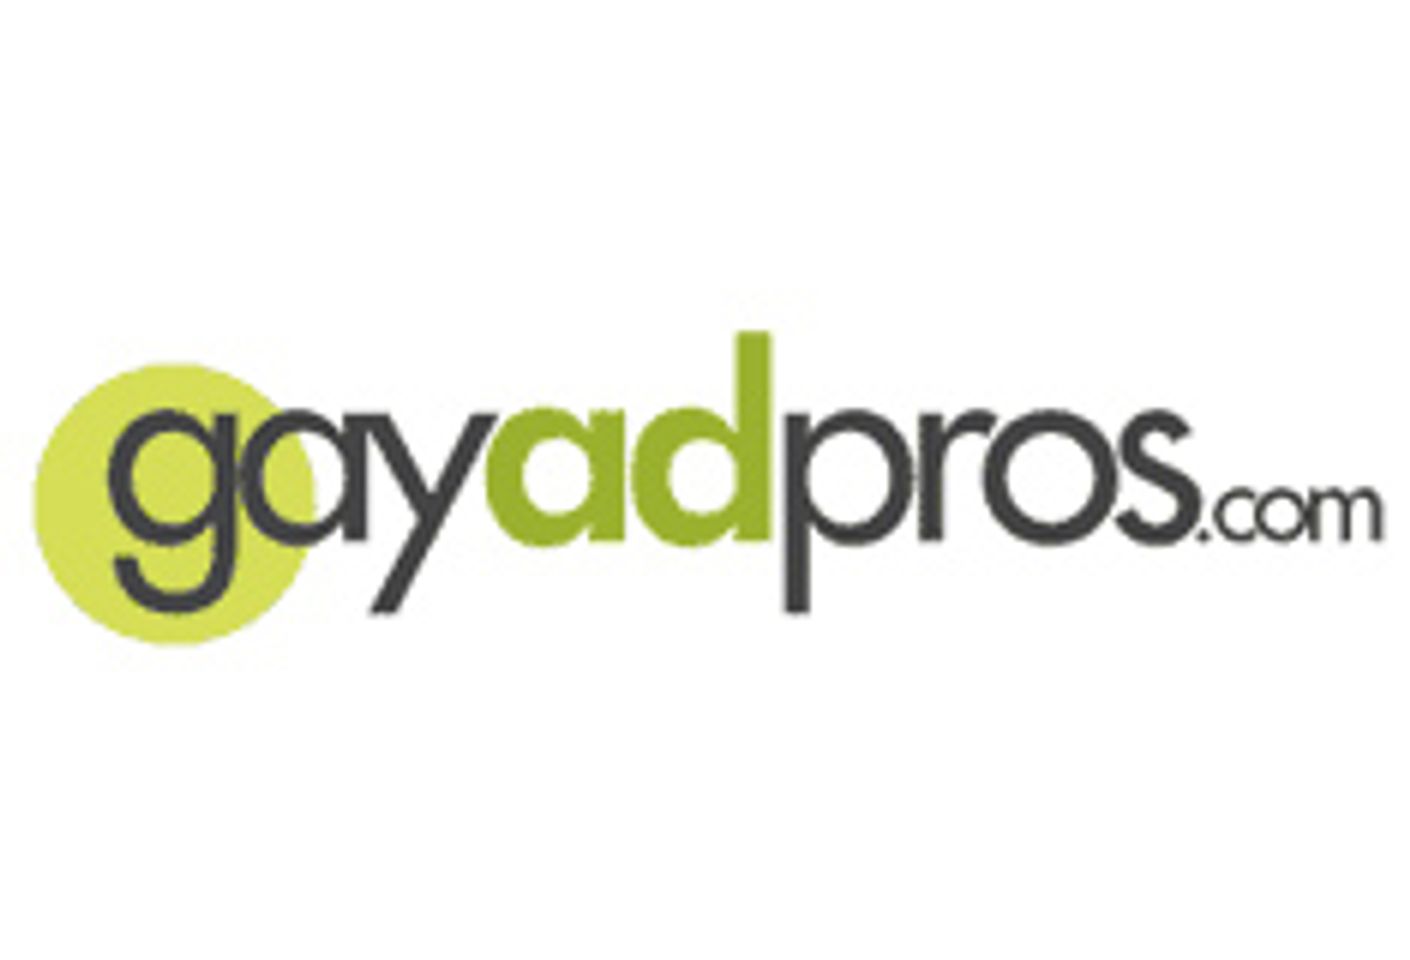 Gay Ad Pros Offers Spring Cash Bonuses to New Advertisers, Publishers